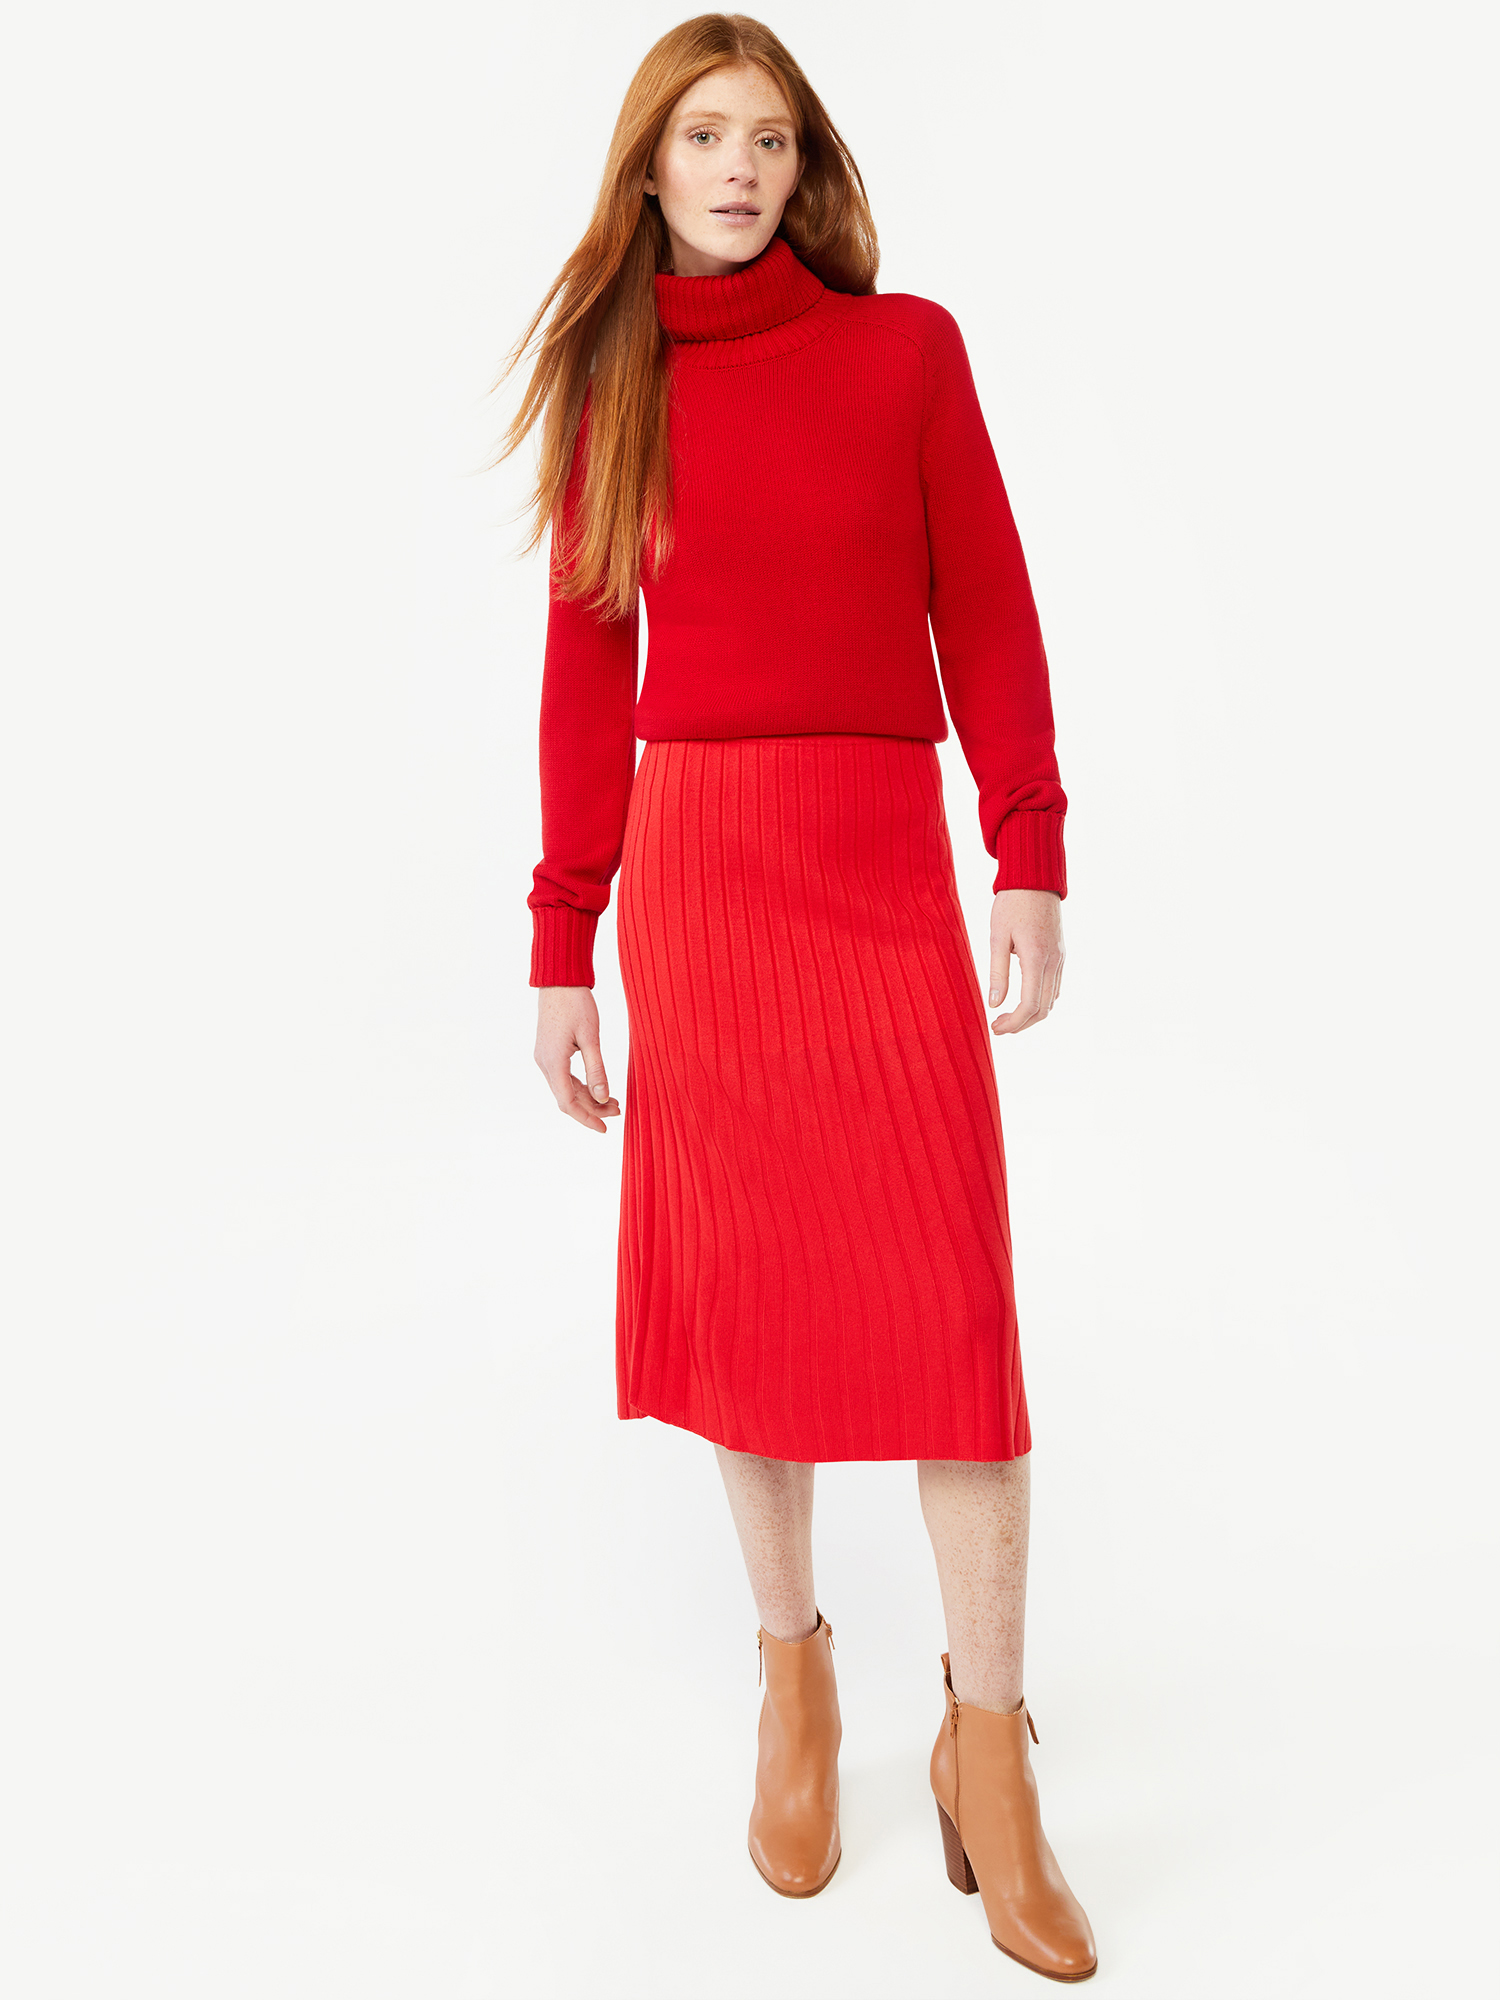 Free Assembly Women's Pleated Midi Sweater Skirt - image 5 of 6